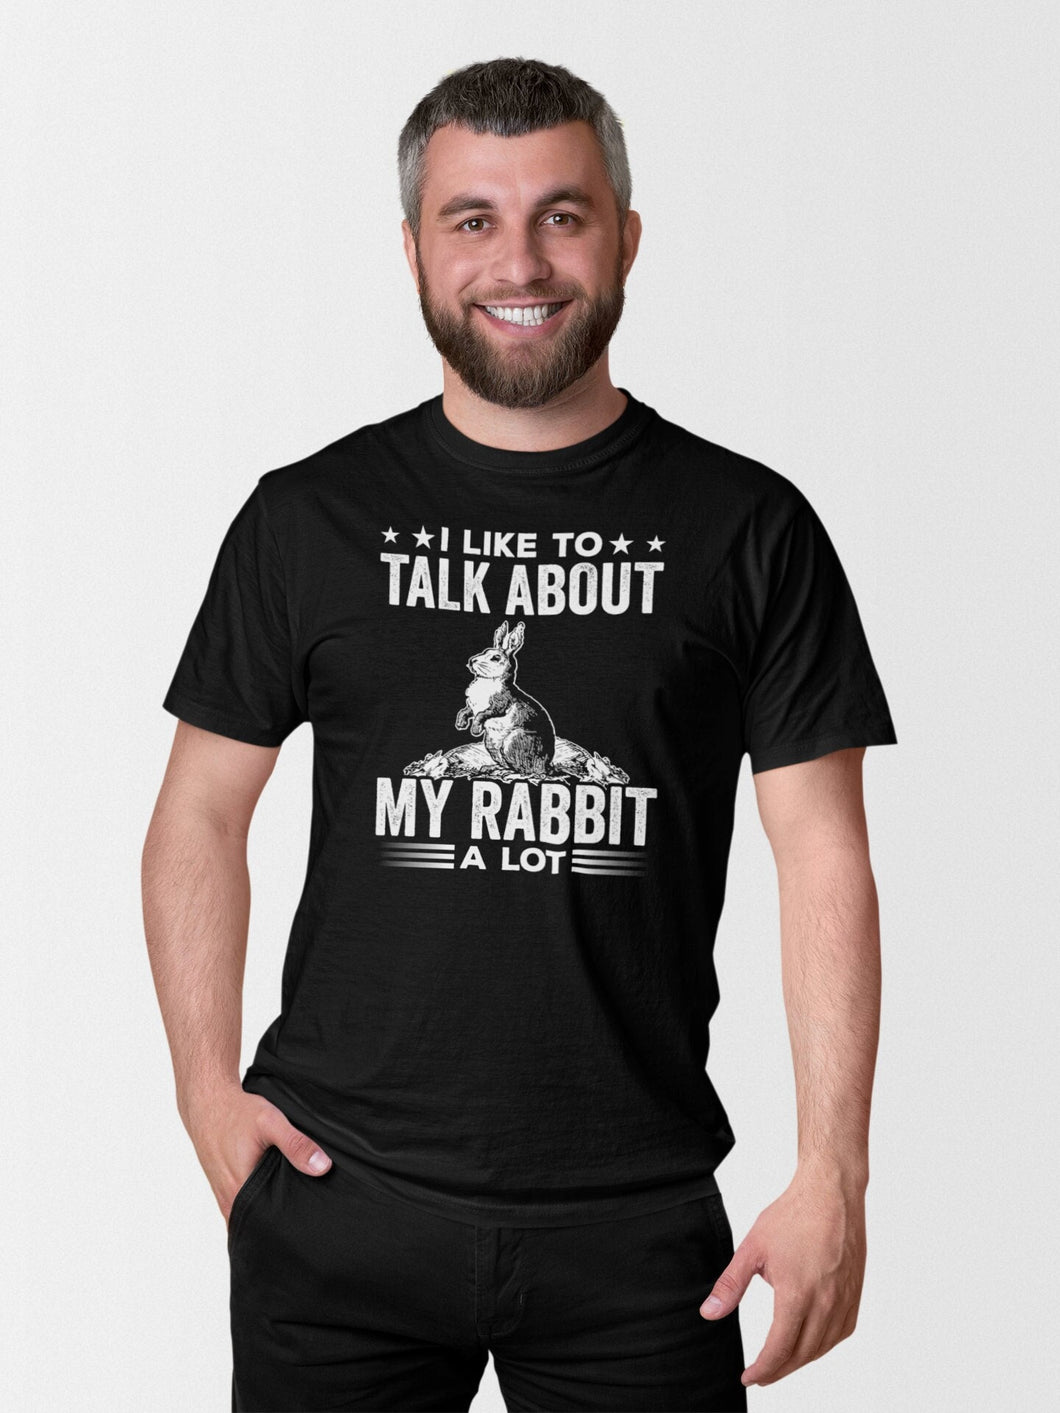 I Like To Talk About My Rabbit A Lot Shirt, Funny Rabbit Shirt, Rabbit Lover Gift, Bunny Lover Gift